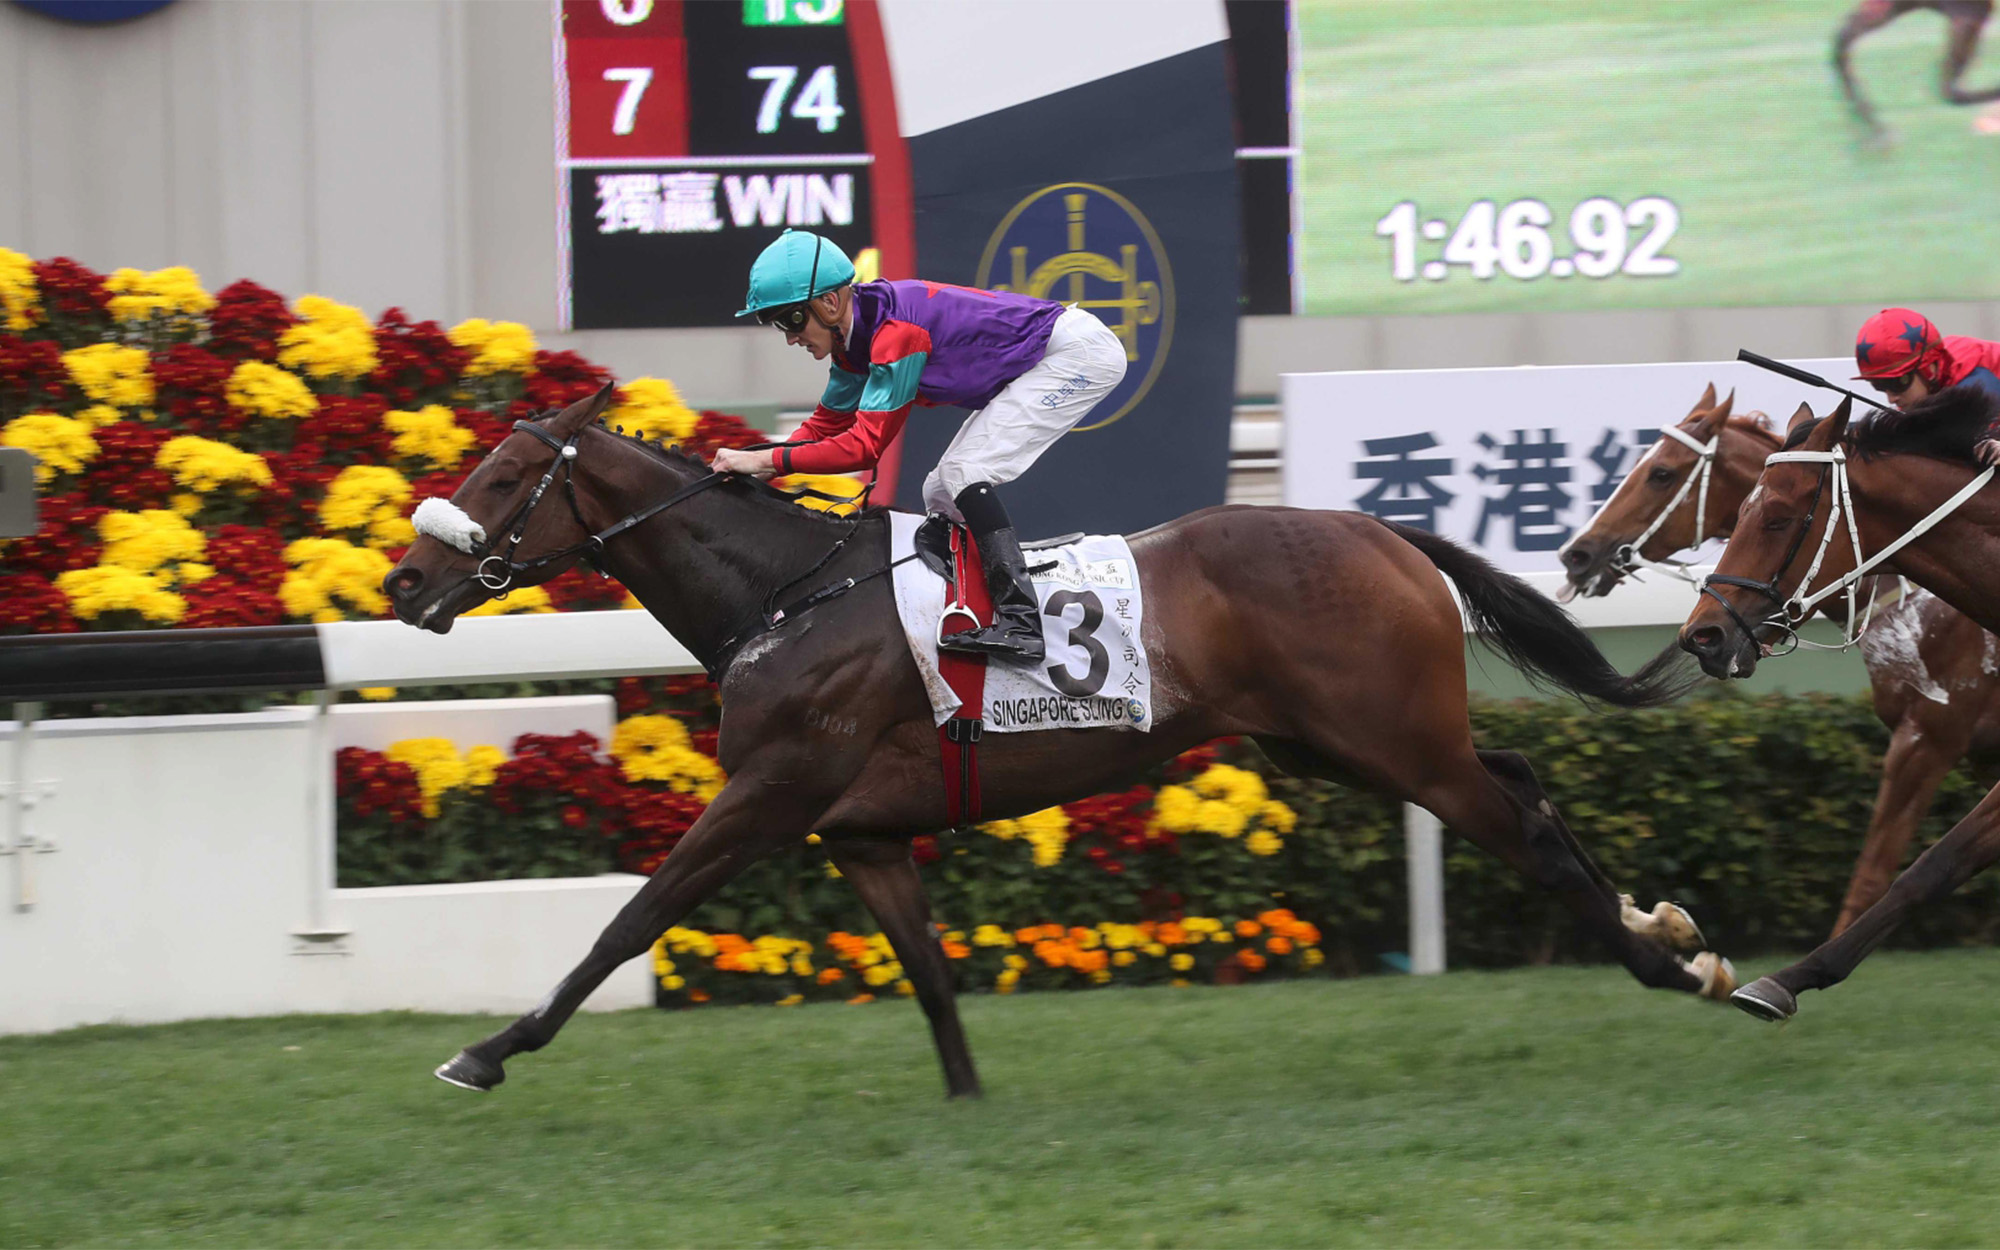 Singapore Sling – HK : Three unplaced runs in return from a near 12 month layoff with injury; 2018 Hong Kong Classic Cup winner who has placed at G1 level to Beauty Generation.